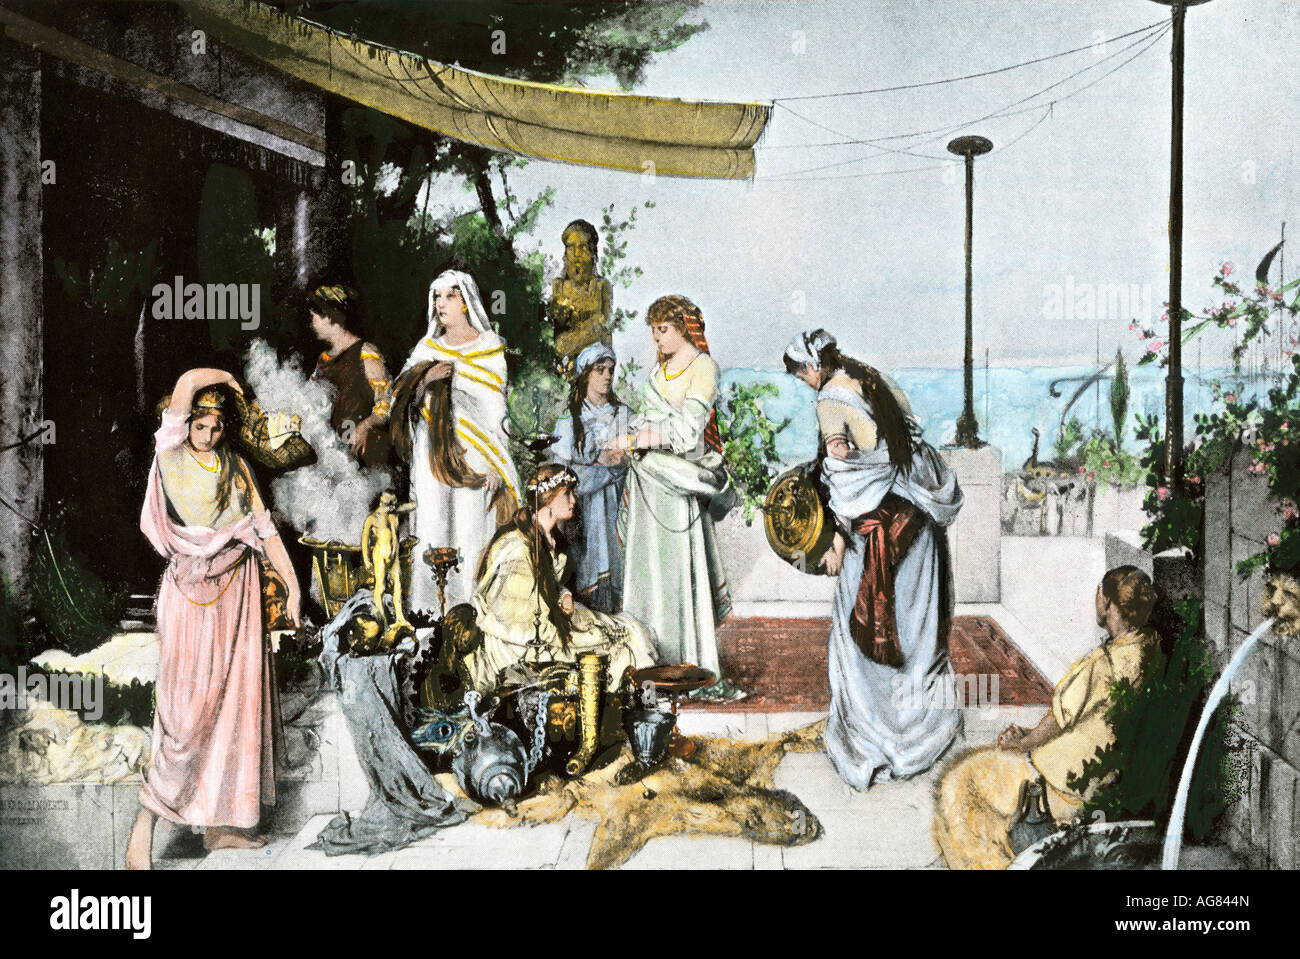 Carthage women sacrifice their hair and jewels to buy weapons against the Roman invasion 146 BC. Hand-colored halftone of an illustration Stock Photo